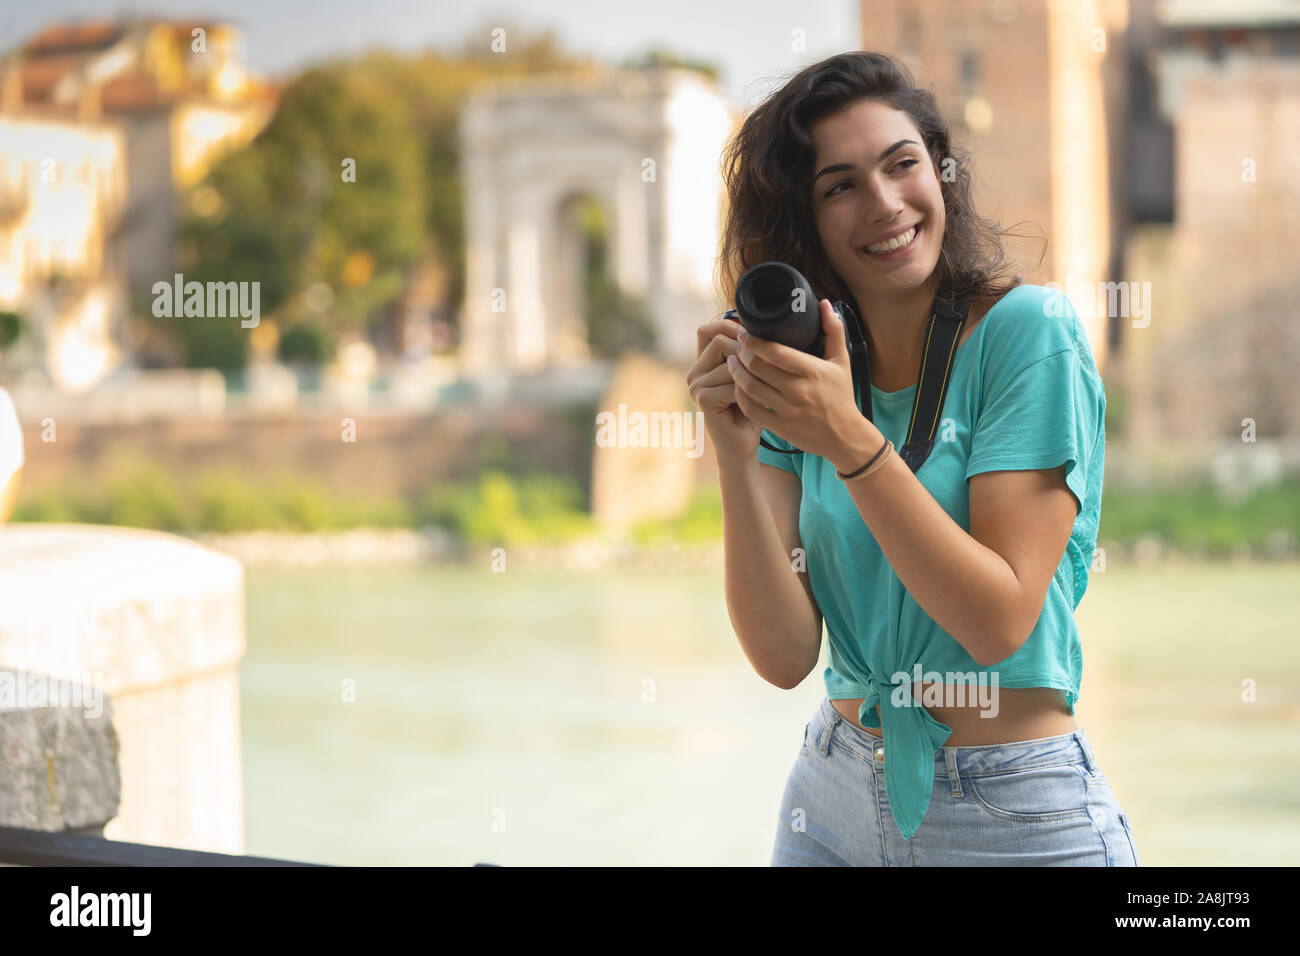 Smiling girl in an Italian city with a camera in her hand. Stock Photo